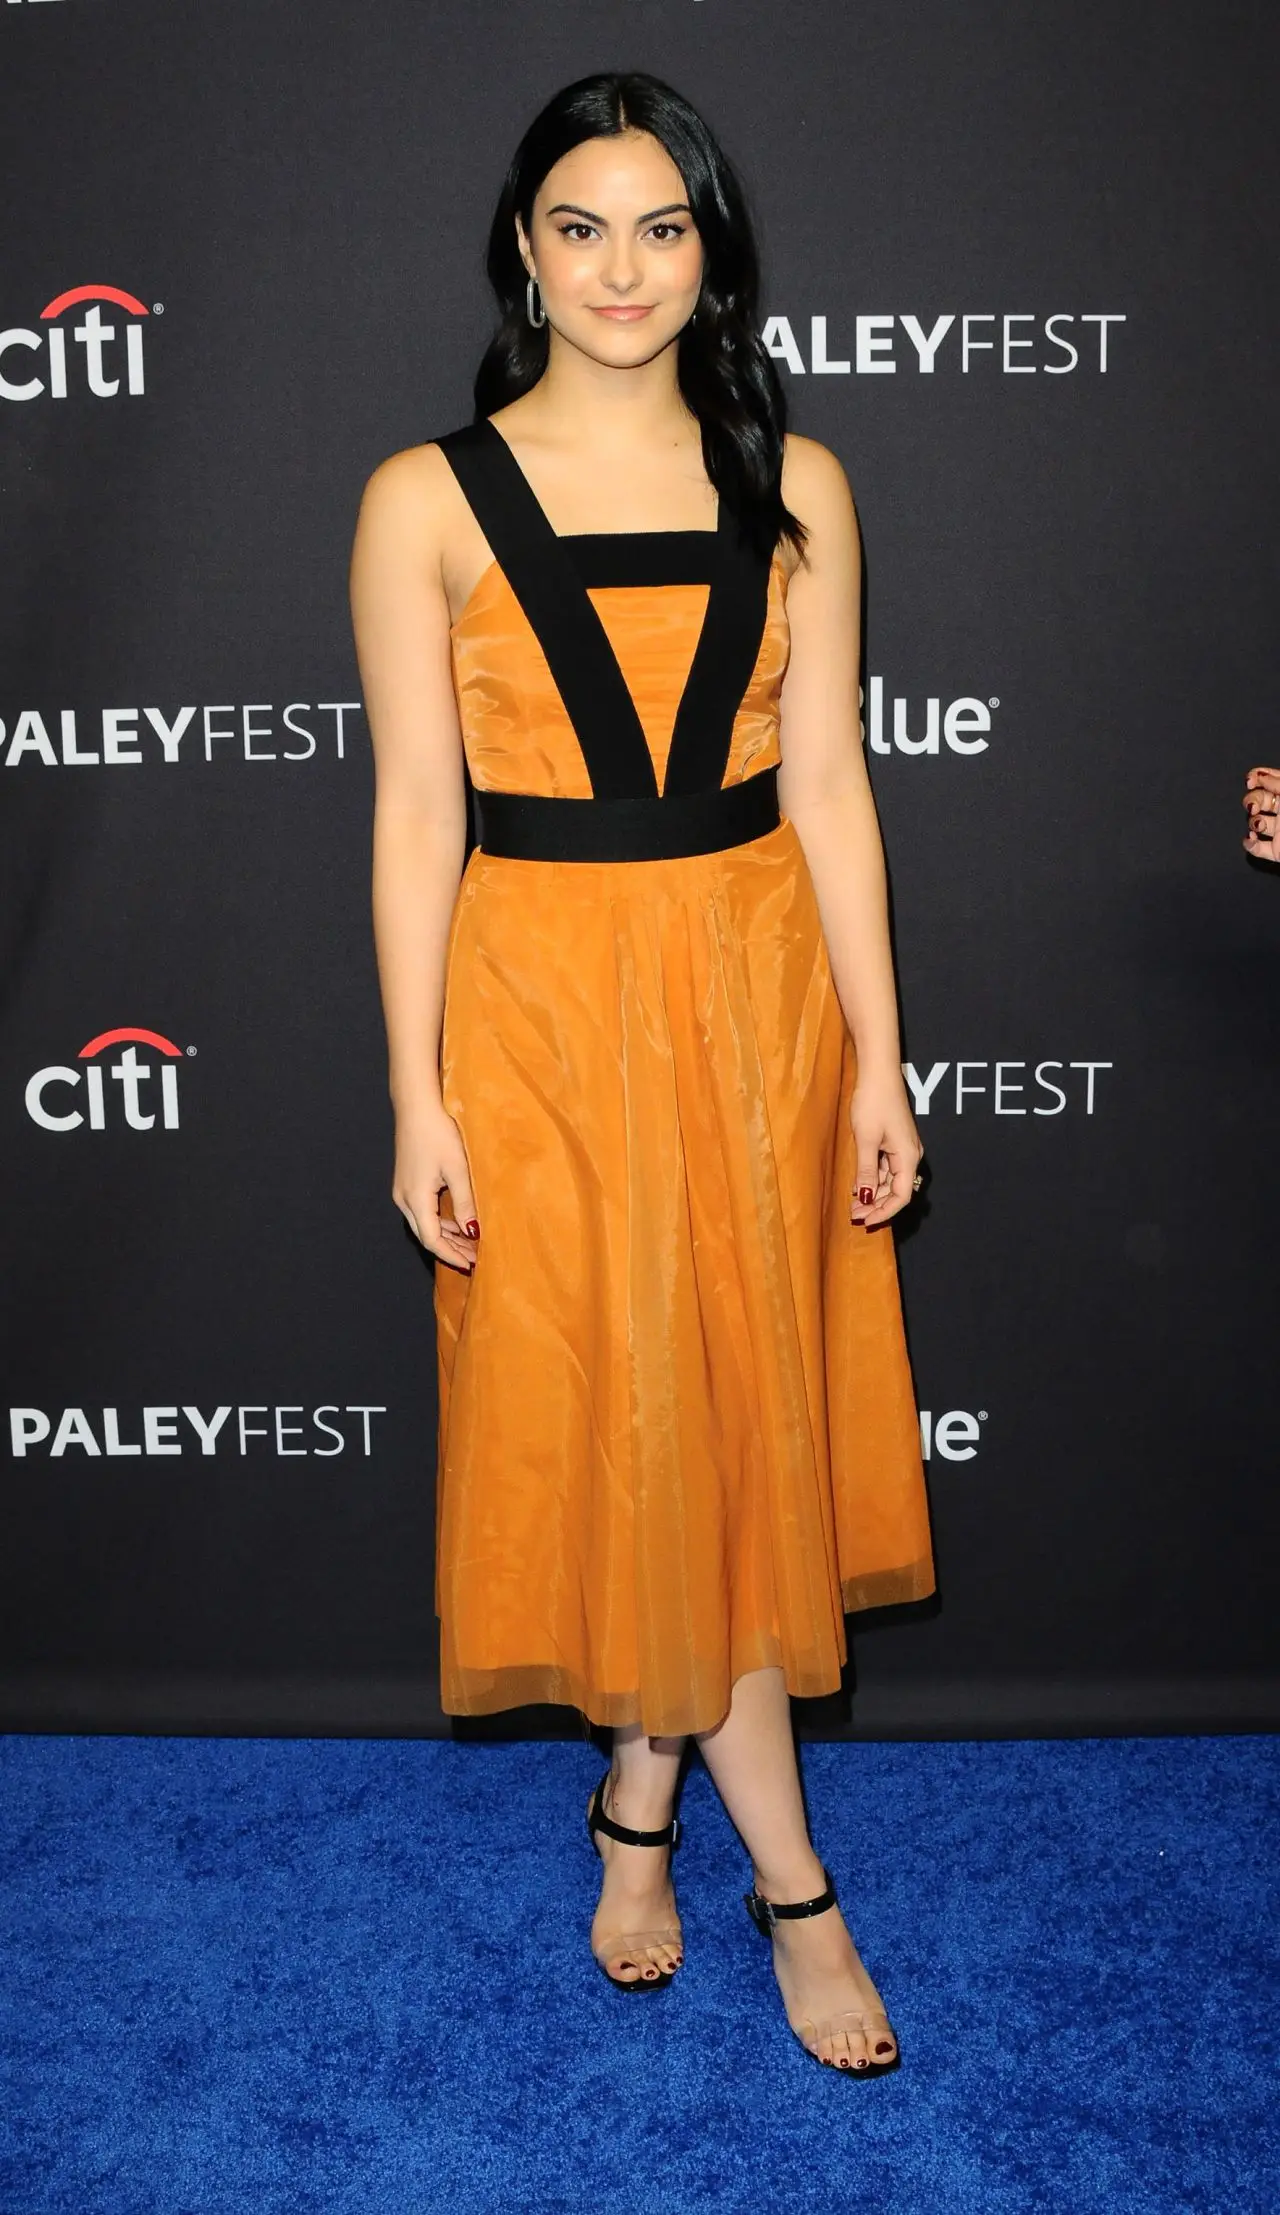 CAMILA MENDES AT RIVERDALE TV SHOW PRESENTATION AT PALEYFEST IN LOS ANGELES2